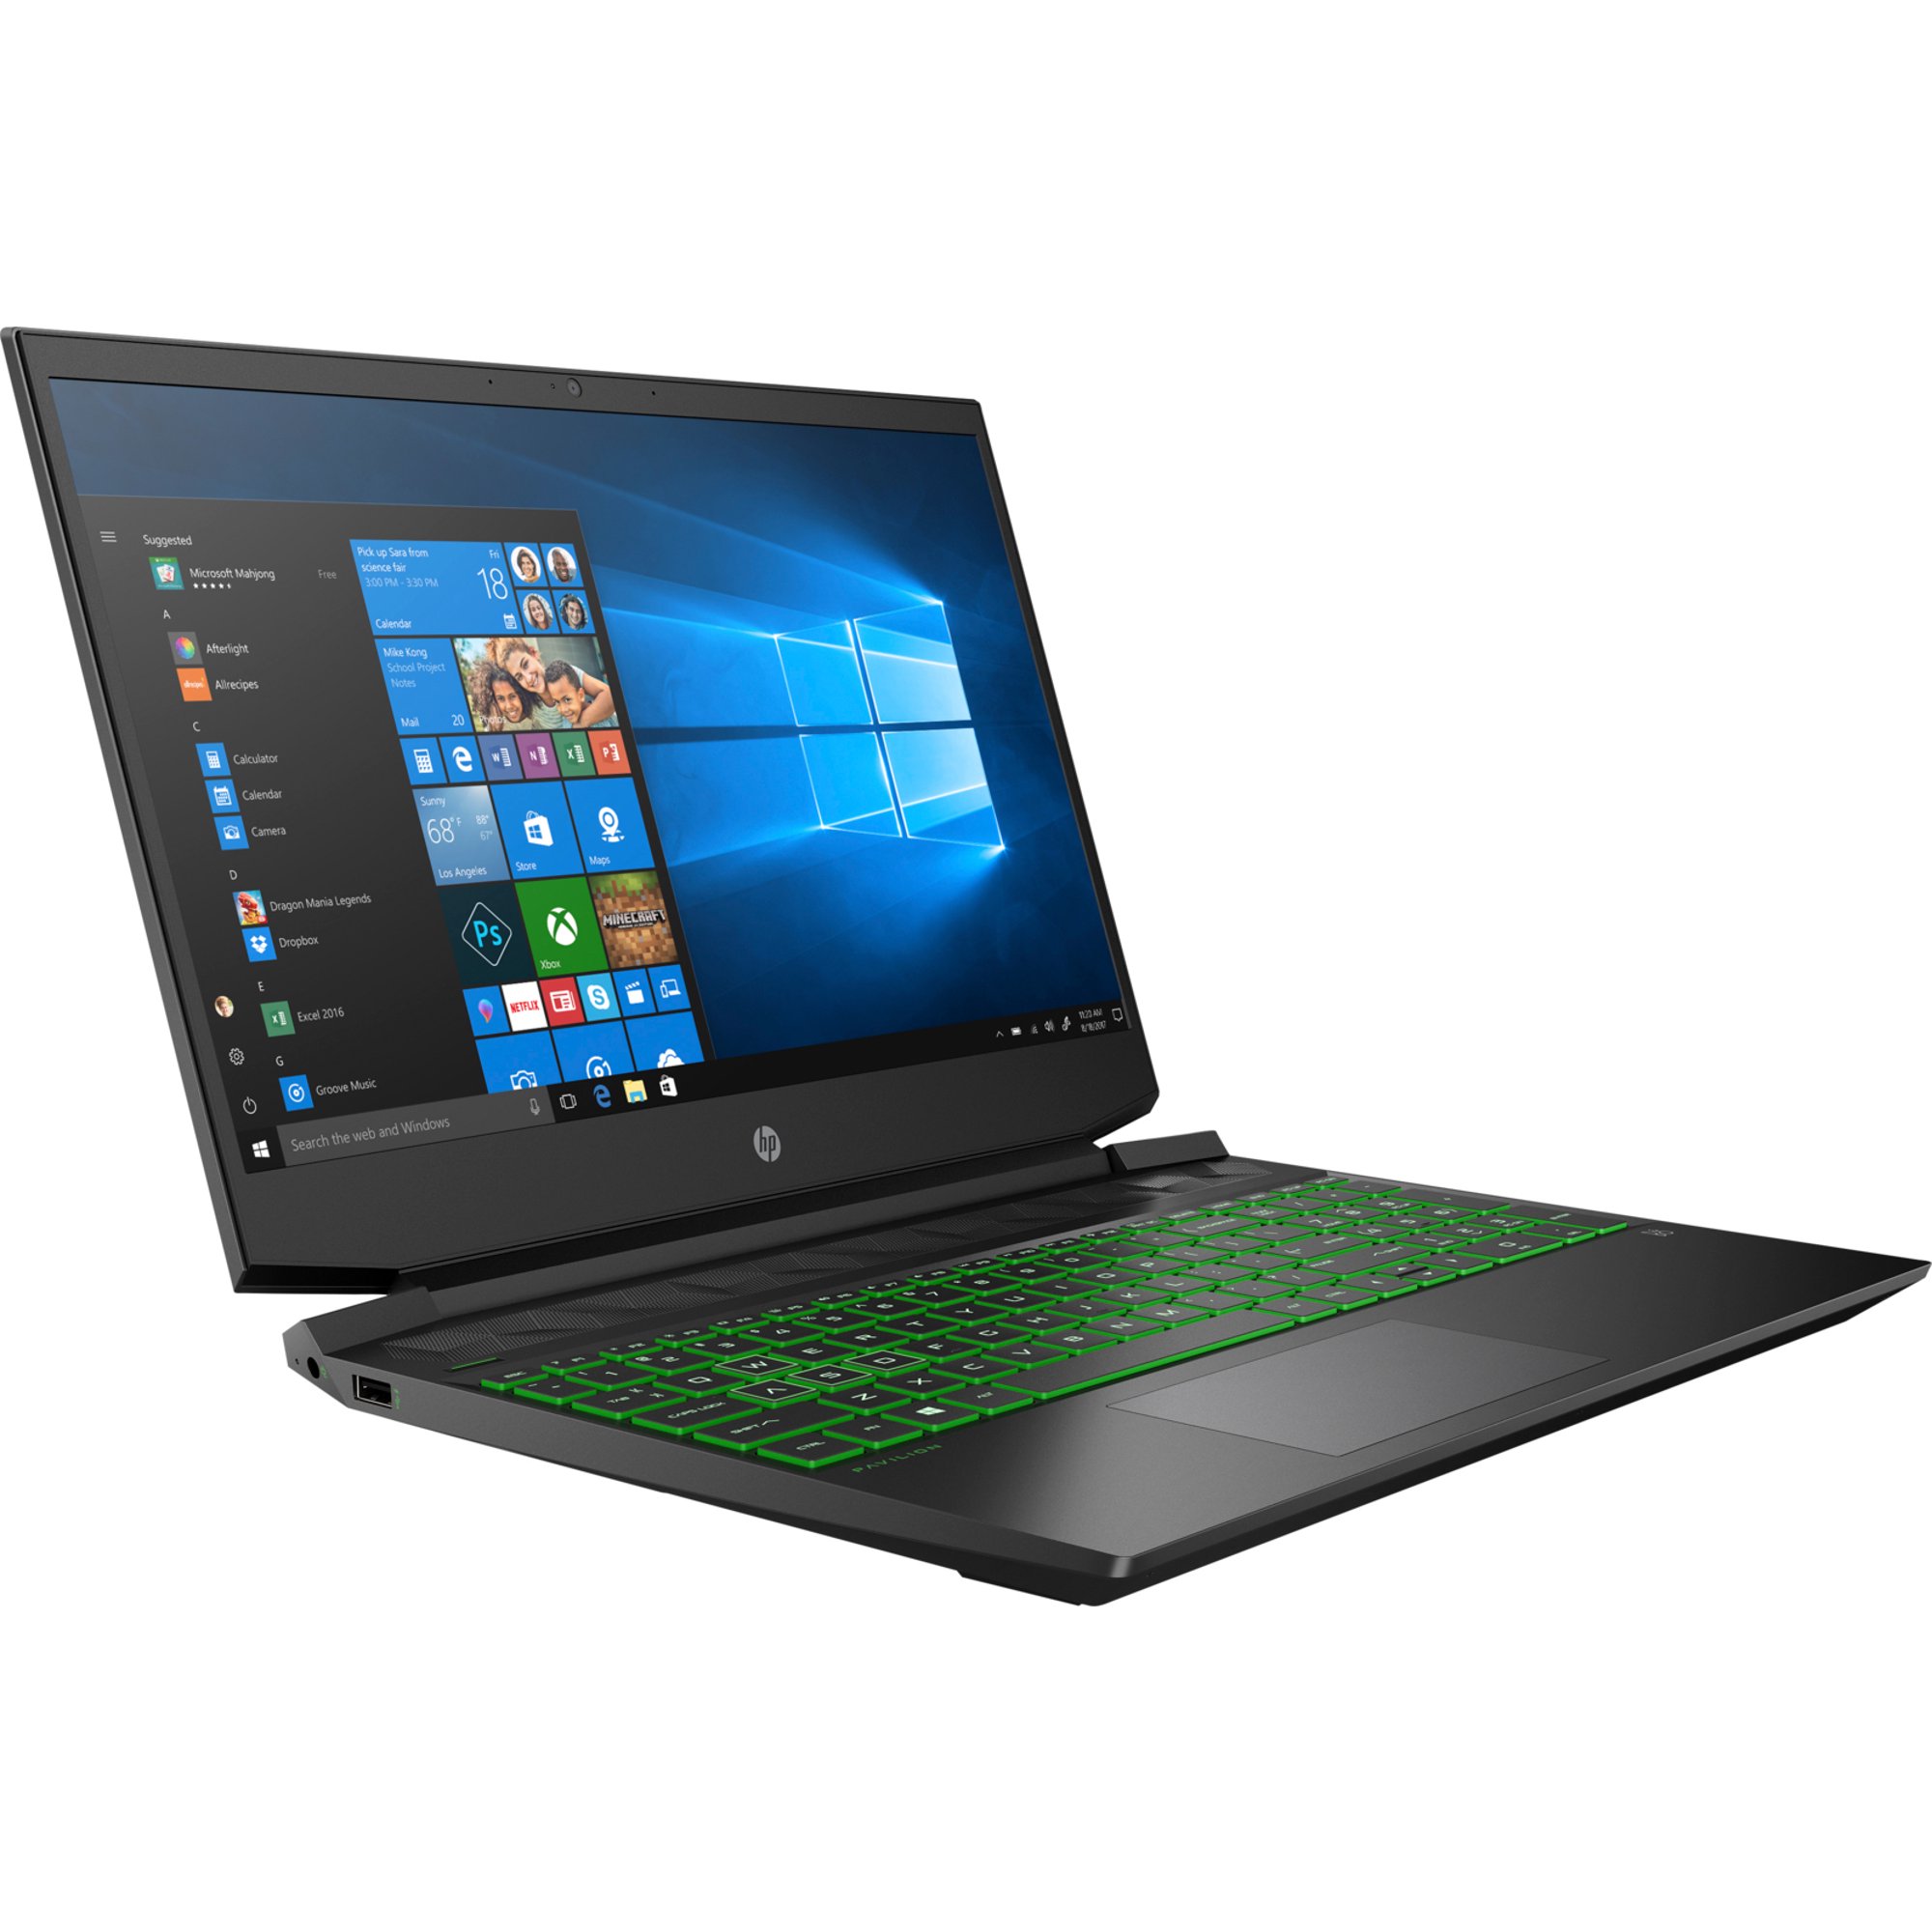 Hp Pavilion 15z 156 Inches Laptop Full Specifications Offers Deals Reviews And More 1812